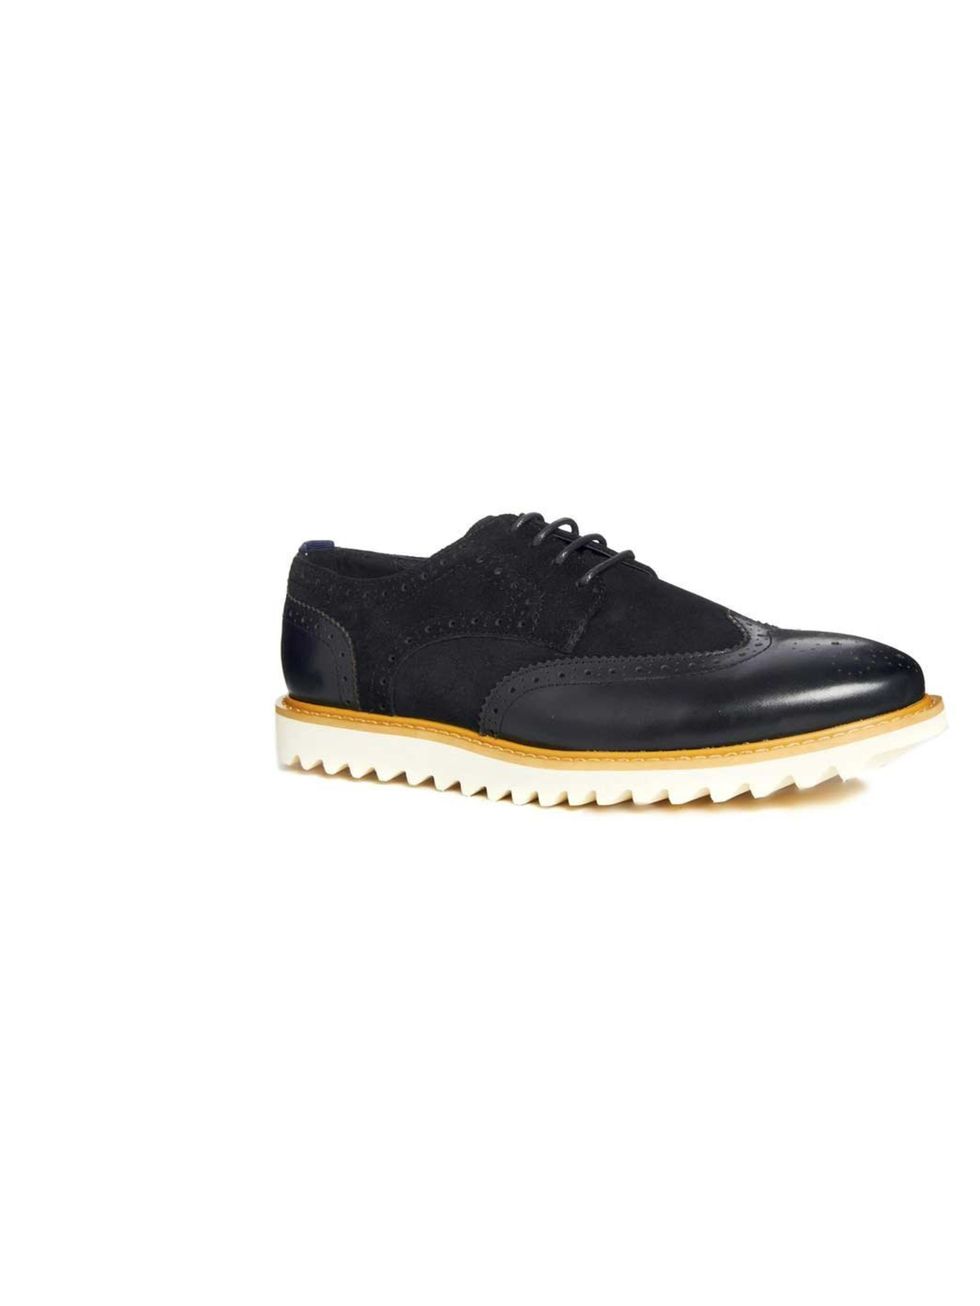 <p><a href="http://www.asos.com/ASOS/ASOS-Brogue-Shoes-in-Leather/Prod/pgeproduct.aspx?iid=3448379&amp;WT.ac=rec_viewed">Asos</a> leather brogues, £65</p>